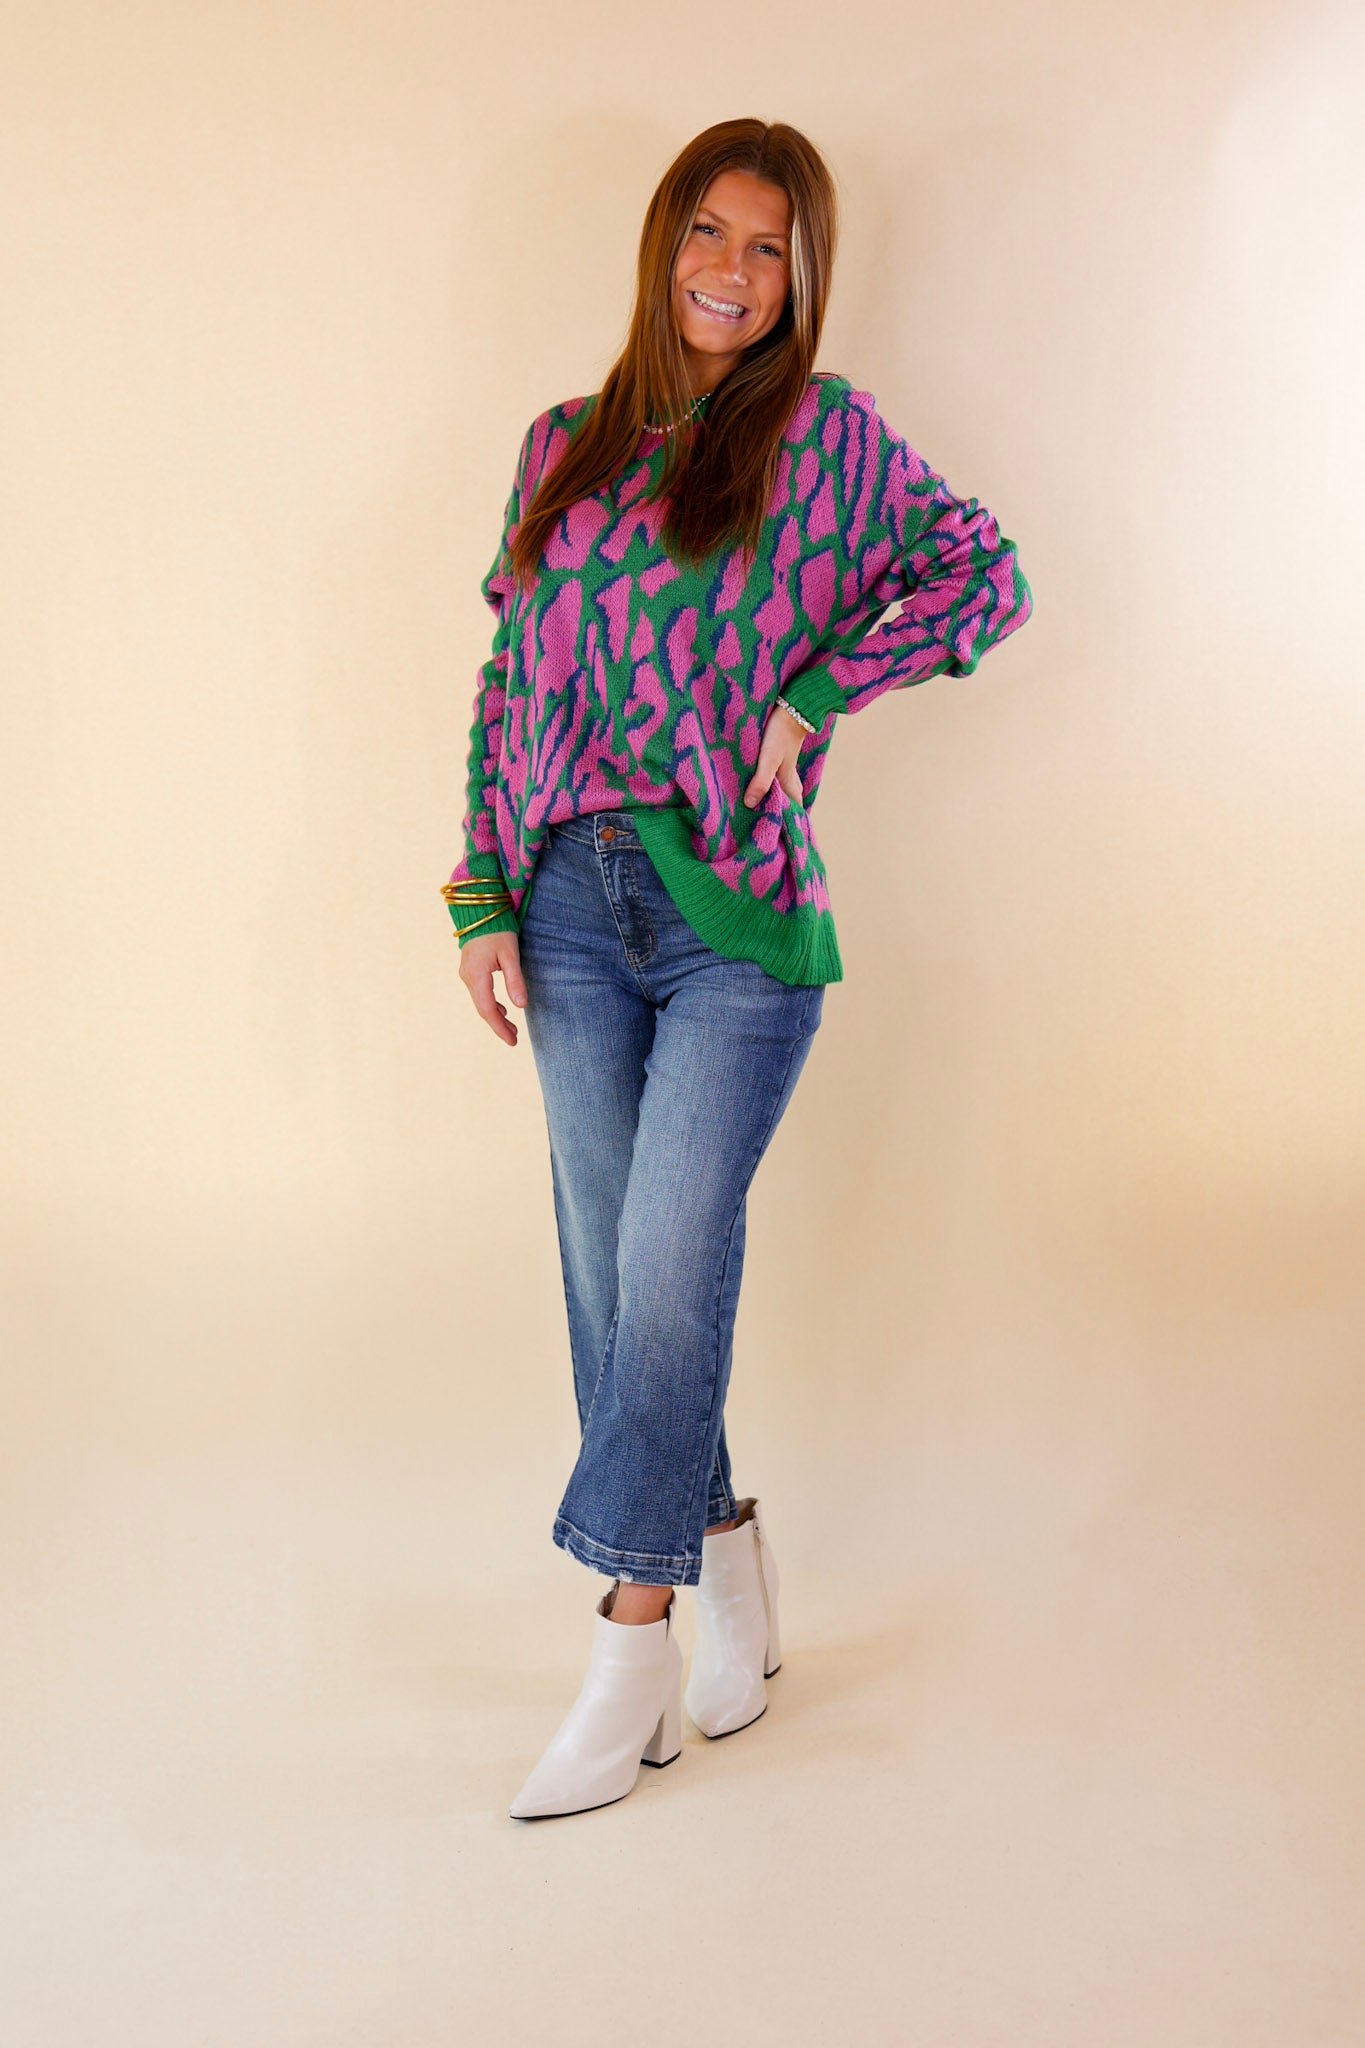 No Hesitation Animal Print Long Sleeve Sweater in Green and Purple - Giddy Up Glamour Boutique